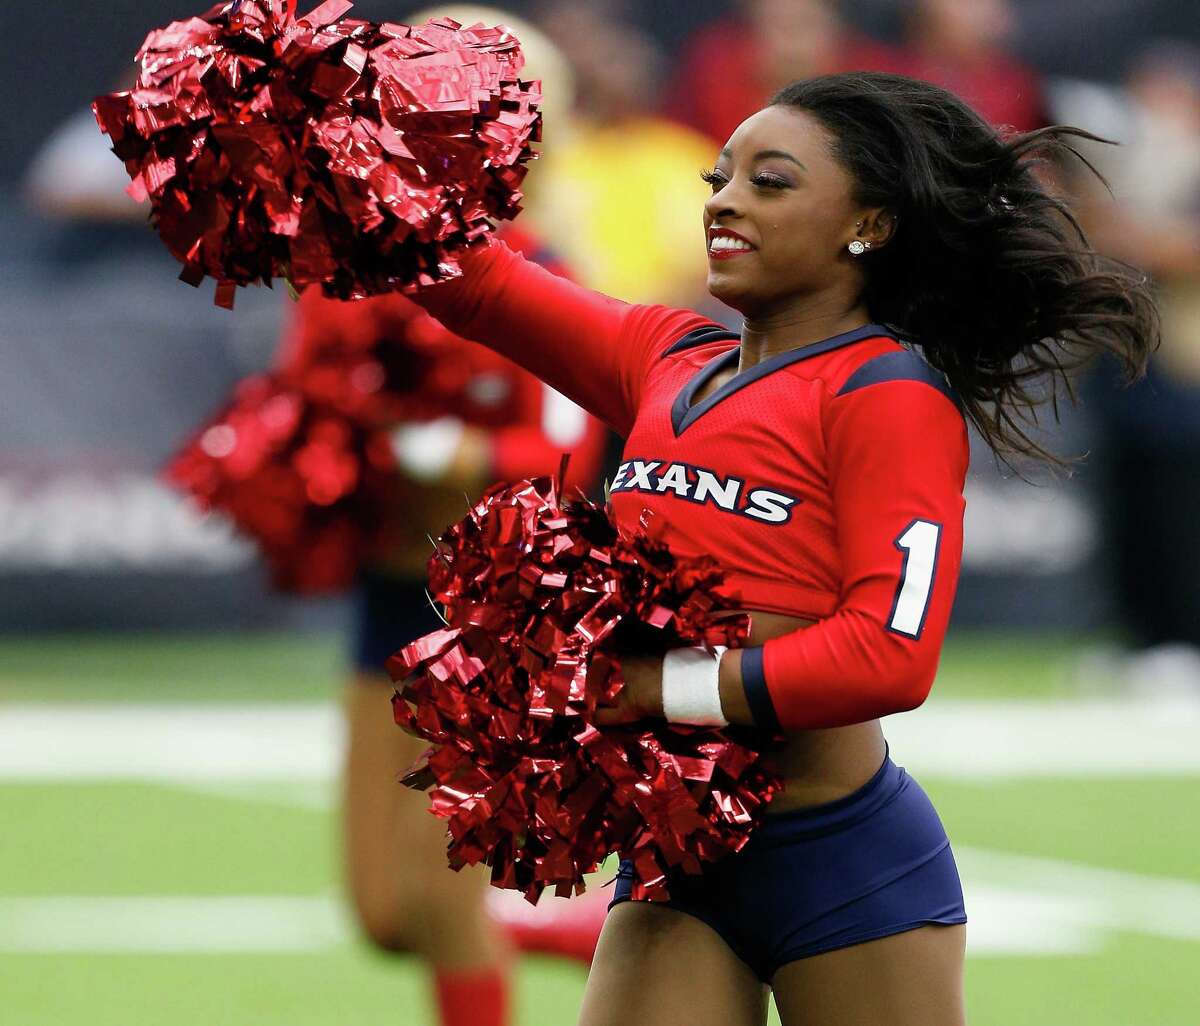 Honorary Houston Texans cheerleader and Olympic gold medalist Simone Biles performs with the cheerleaders during the game against the San Francisco 49ers at NRG Stadium on December 10, 2017 in Houston, Texas.